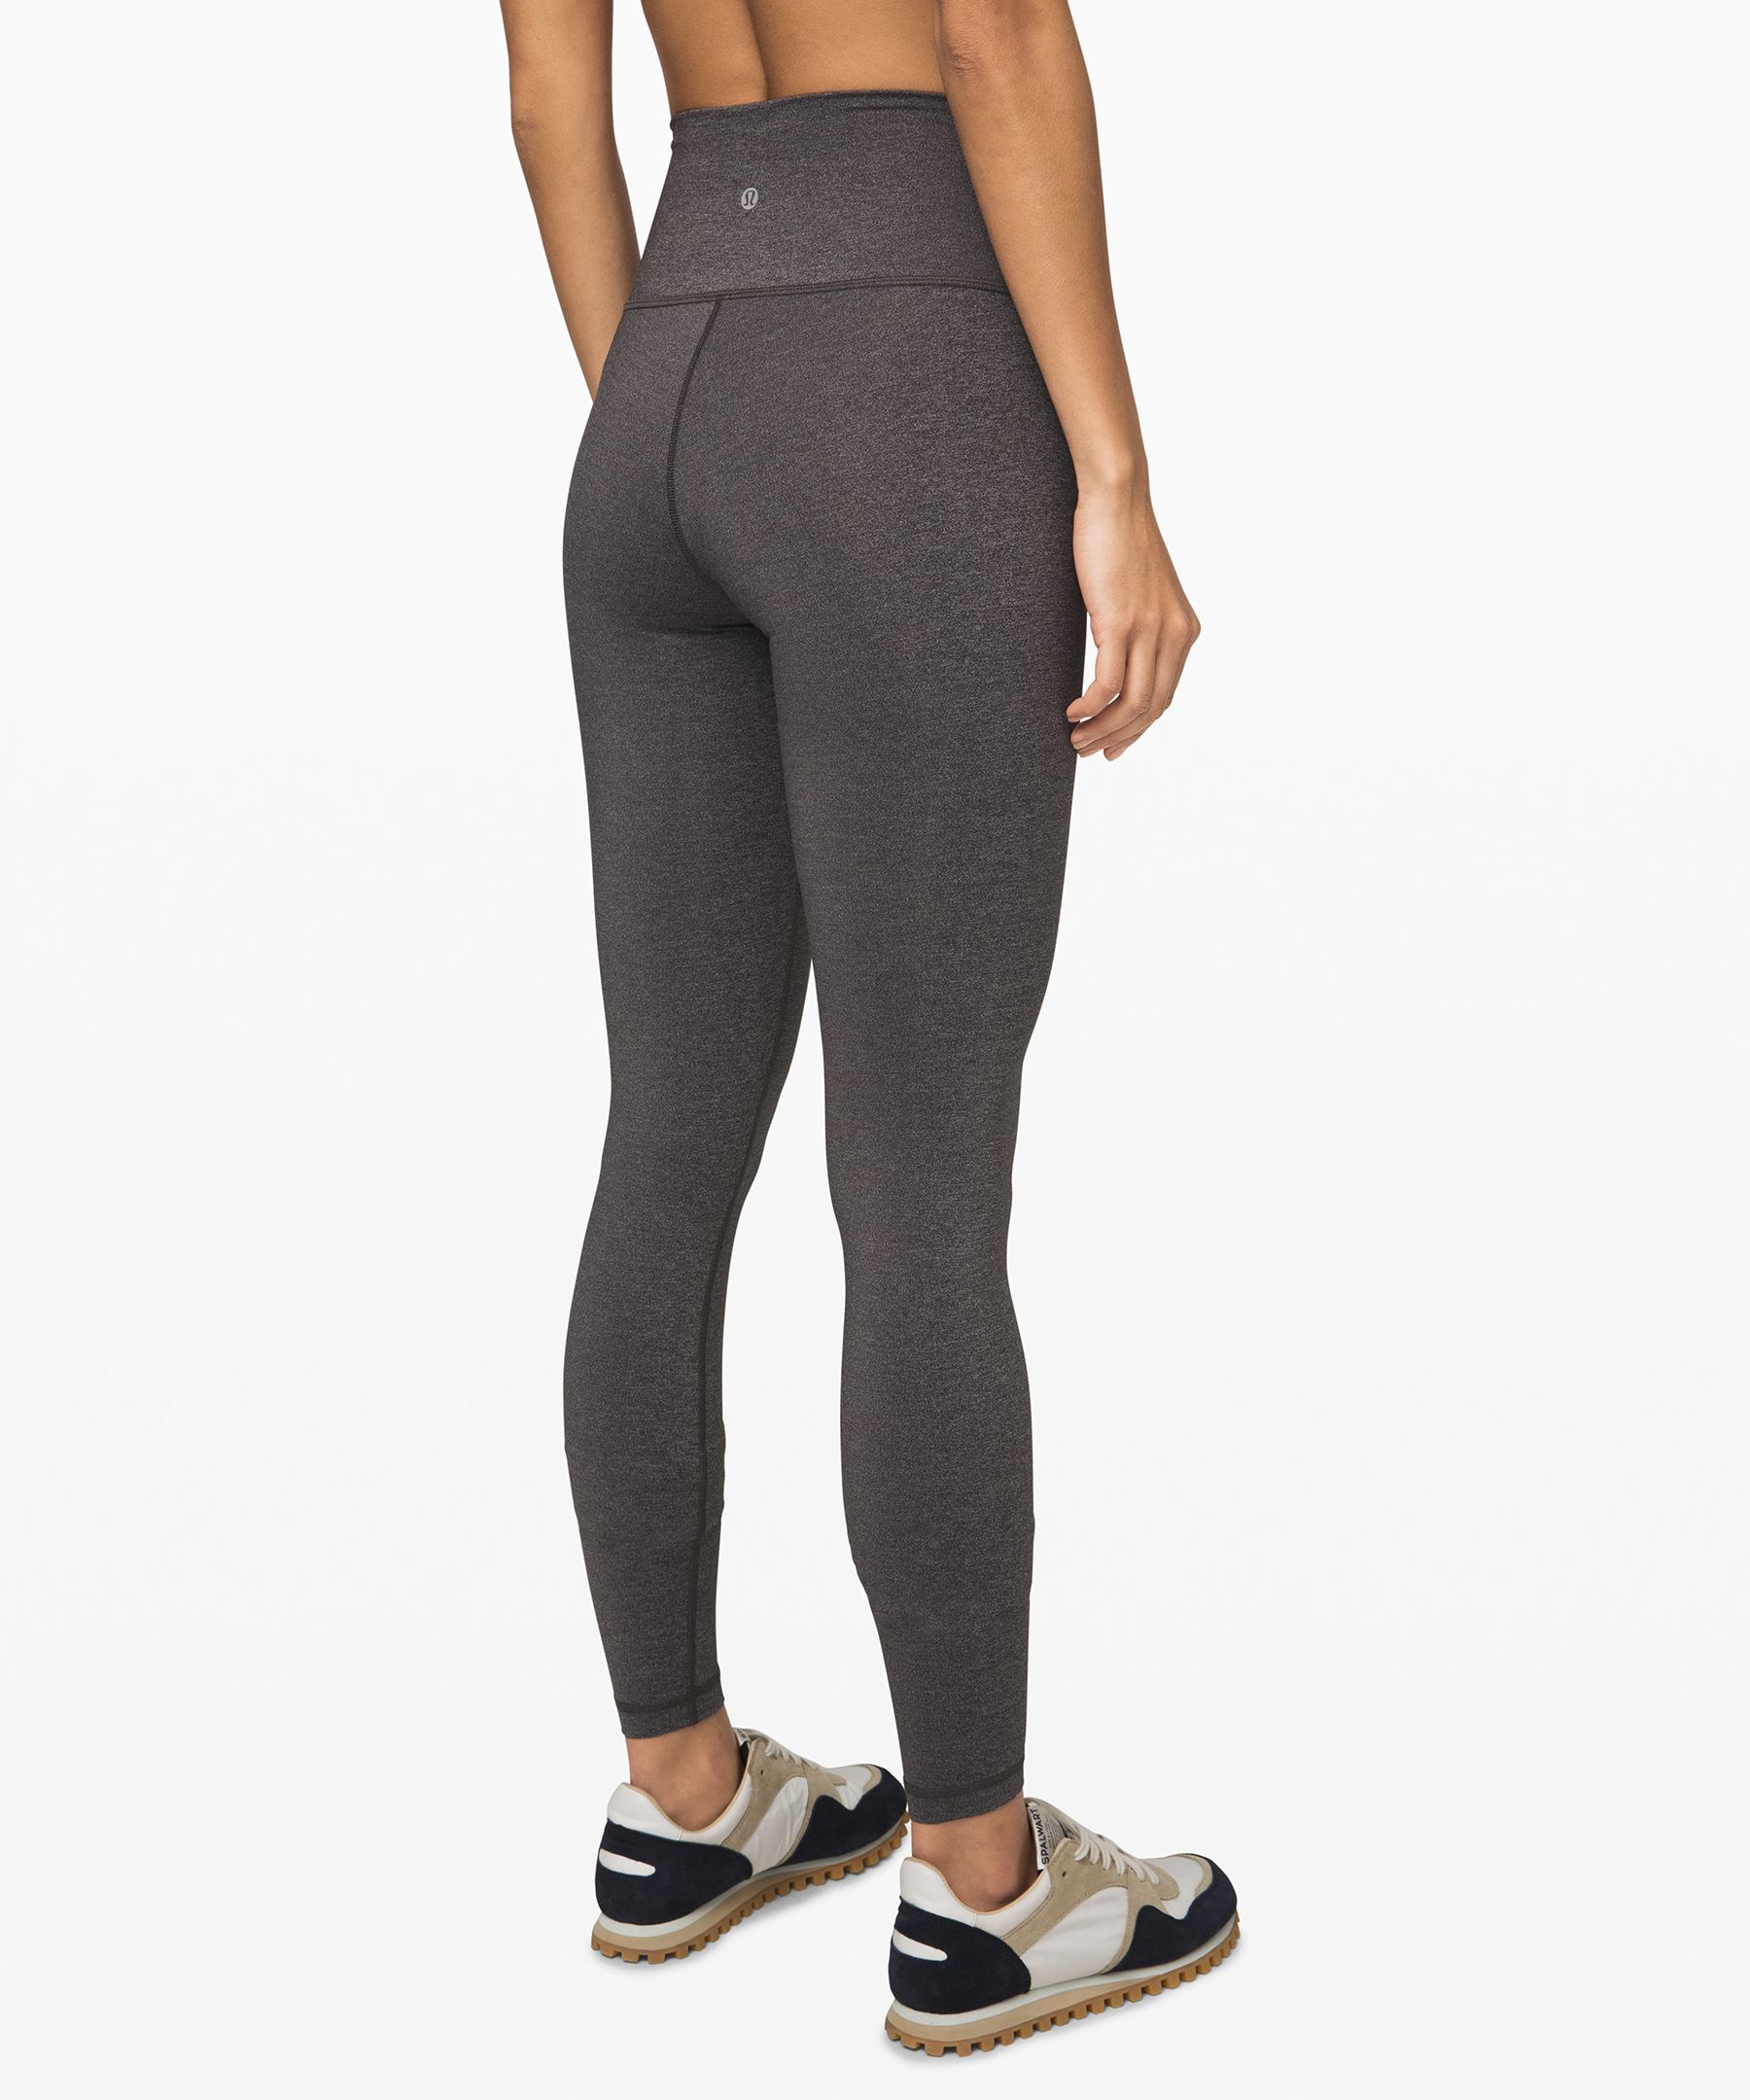 Best Yoga Pants Ever Faux Leather